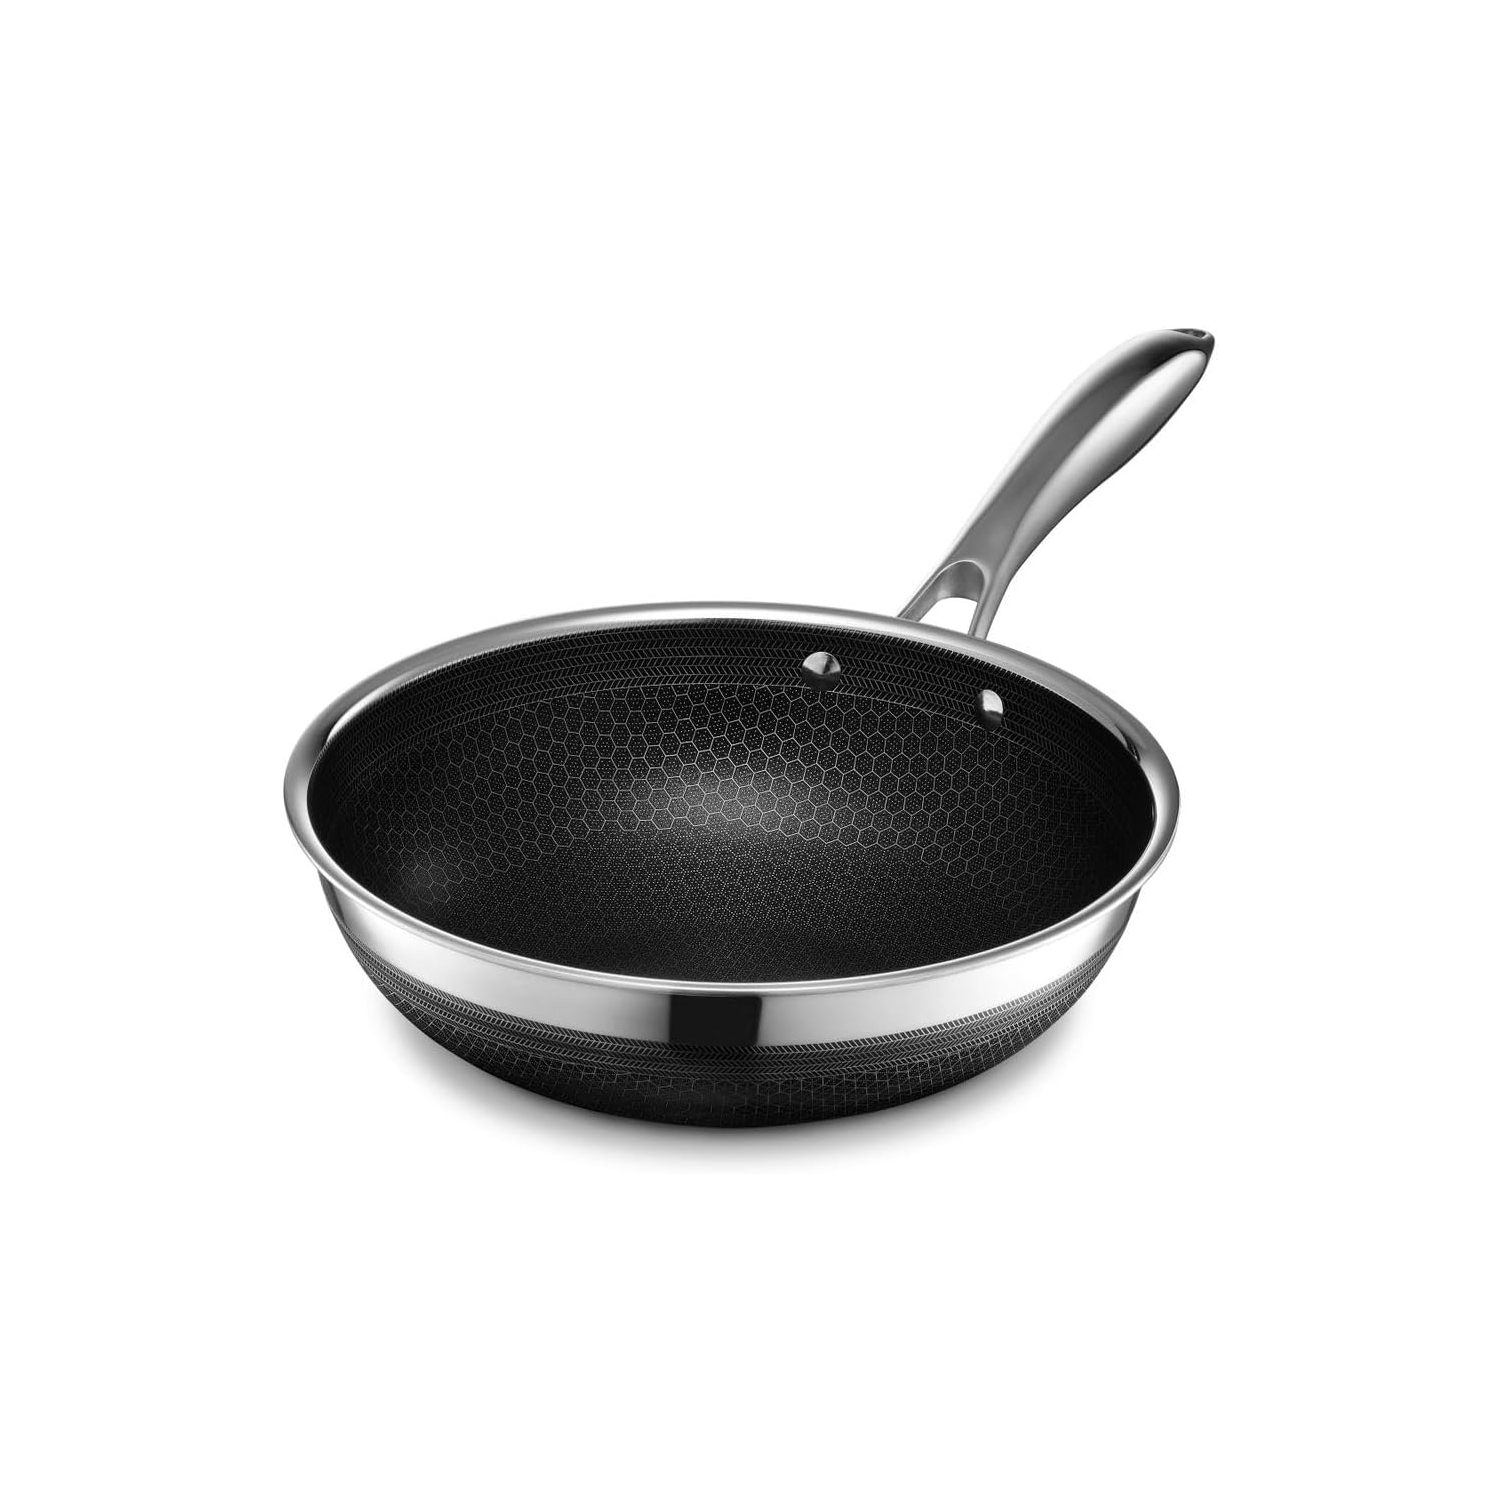 HexClad 10 Inch Hybrid Nonstick Wok, Dishwasher and Oven Friendly, Compatible with All Cooktops